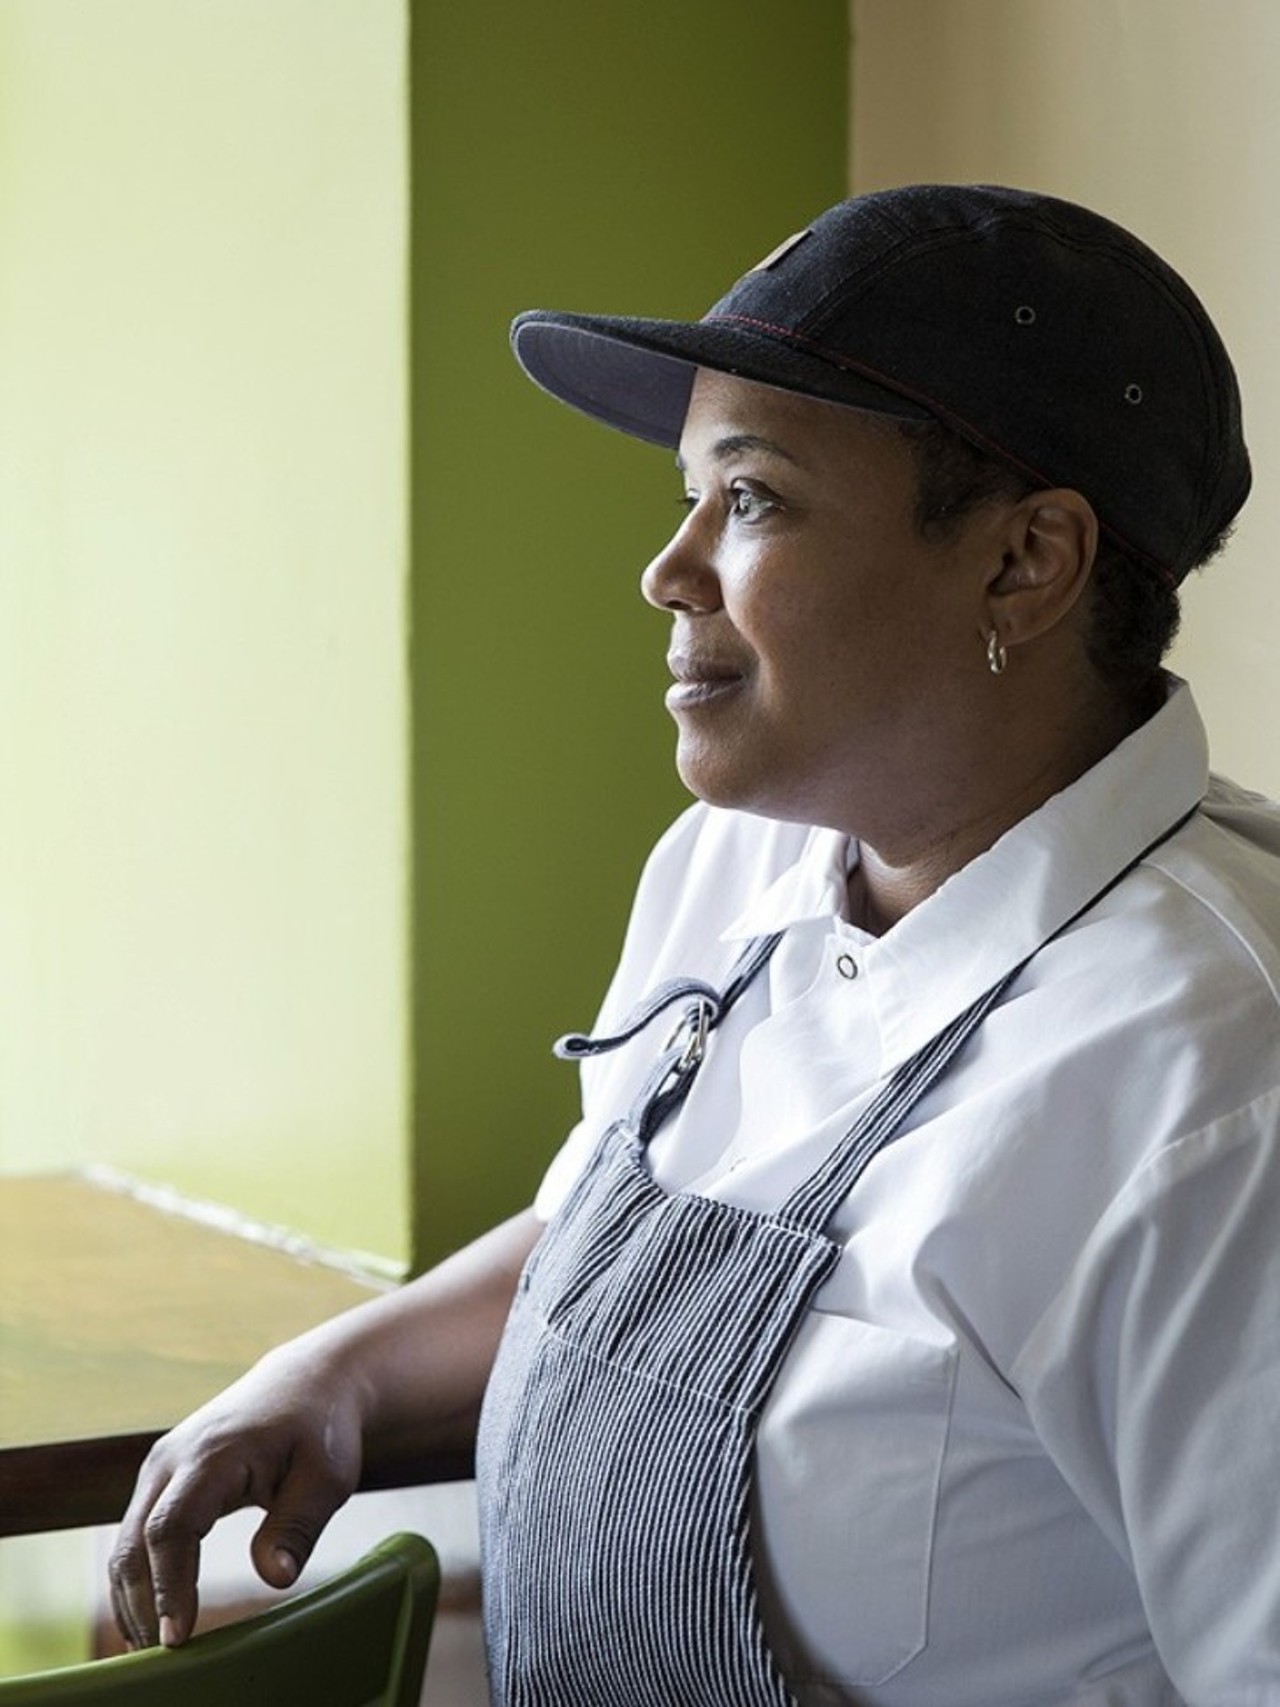 Erika Boyd, co-owner & chef of Detroit Vegan Soul
"That's what it's about &#151; healing people through food, but also about healing a community,&#148; Boyd said during her interview for the 2015 Metro Times&#146; People Issue.  &#147;So many places you go into in the city, you see either all black people or you see all white people. There are very few places that you come in in the city and you see all people."
Photo by Jacob Lewkow